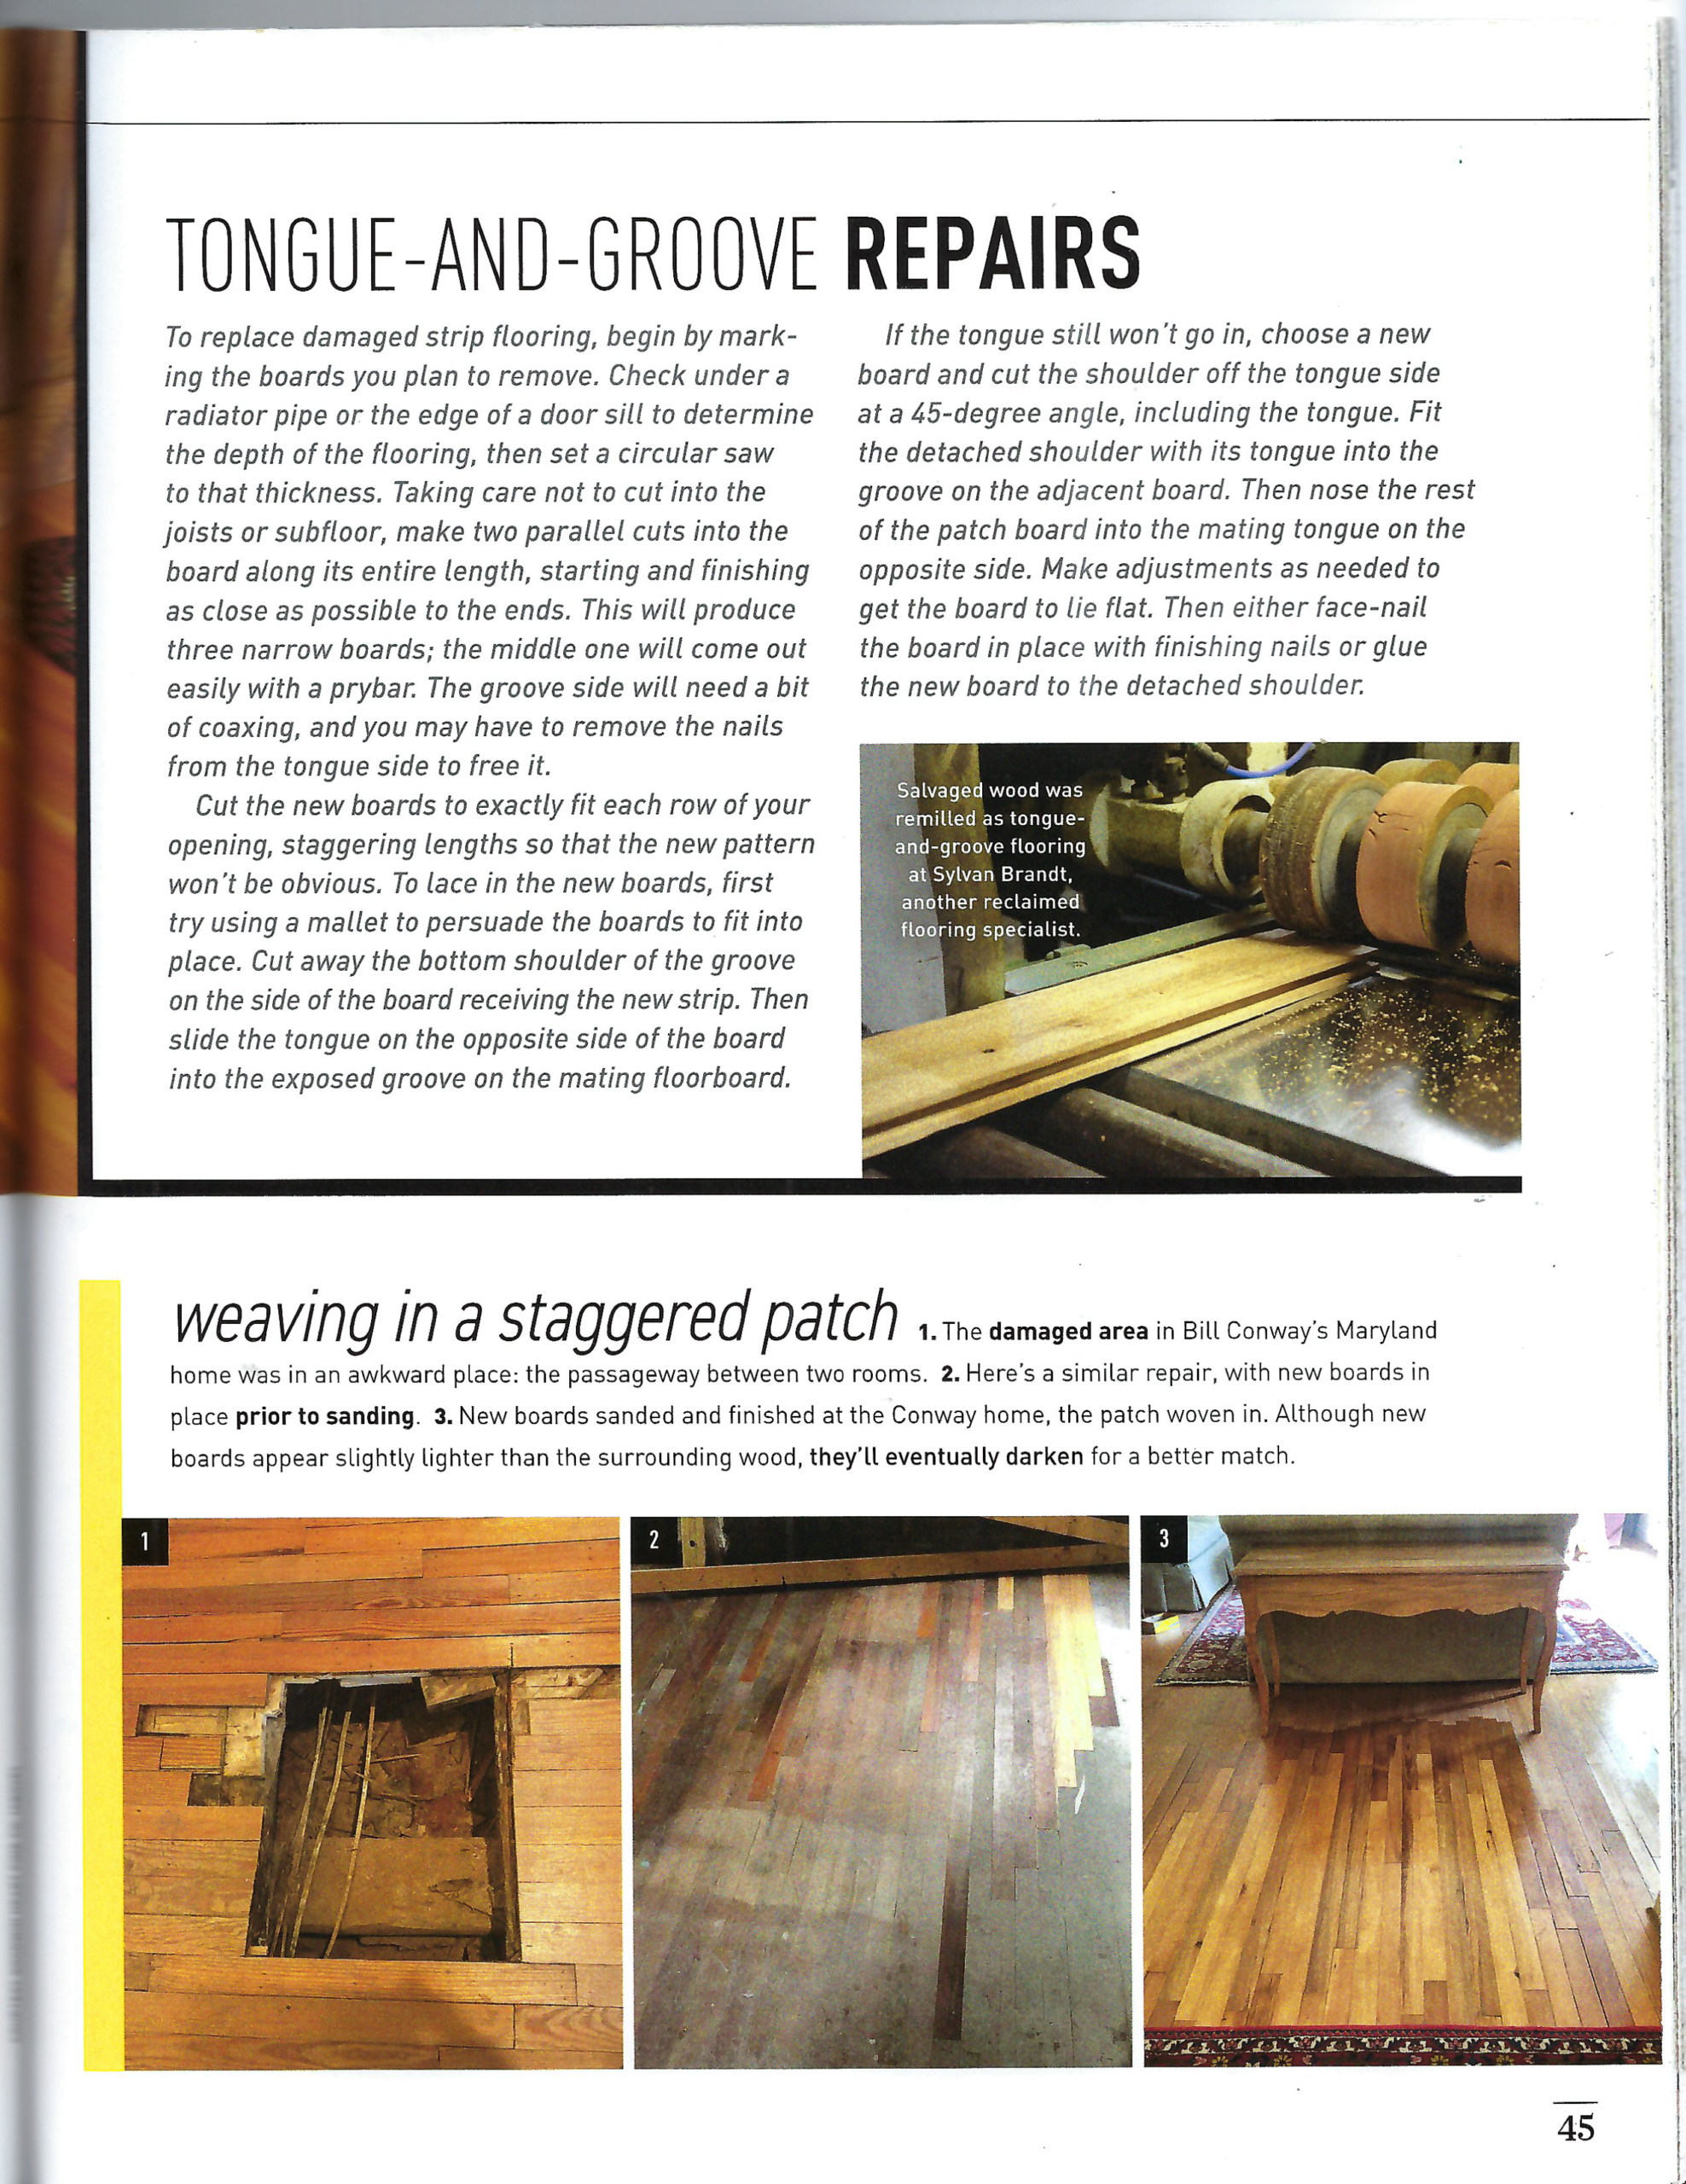 Finding Replacement Boards for Your Old Wood Floors. Old House Journal Lacing in New Boards.